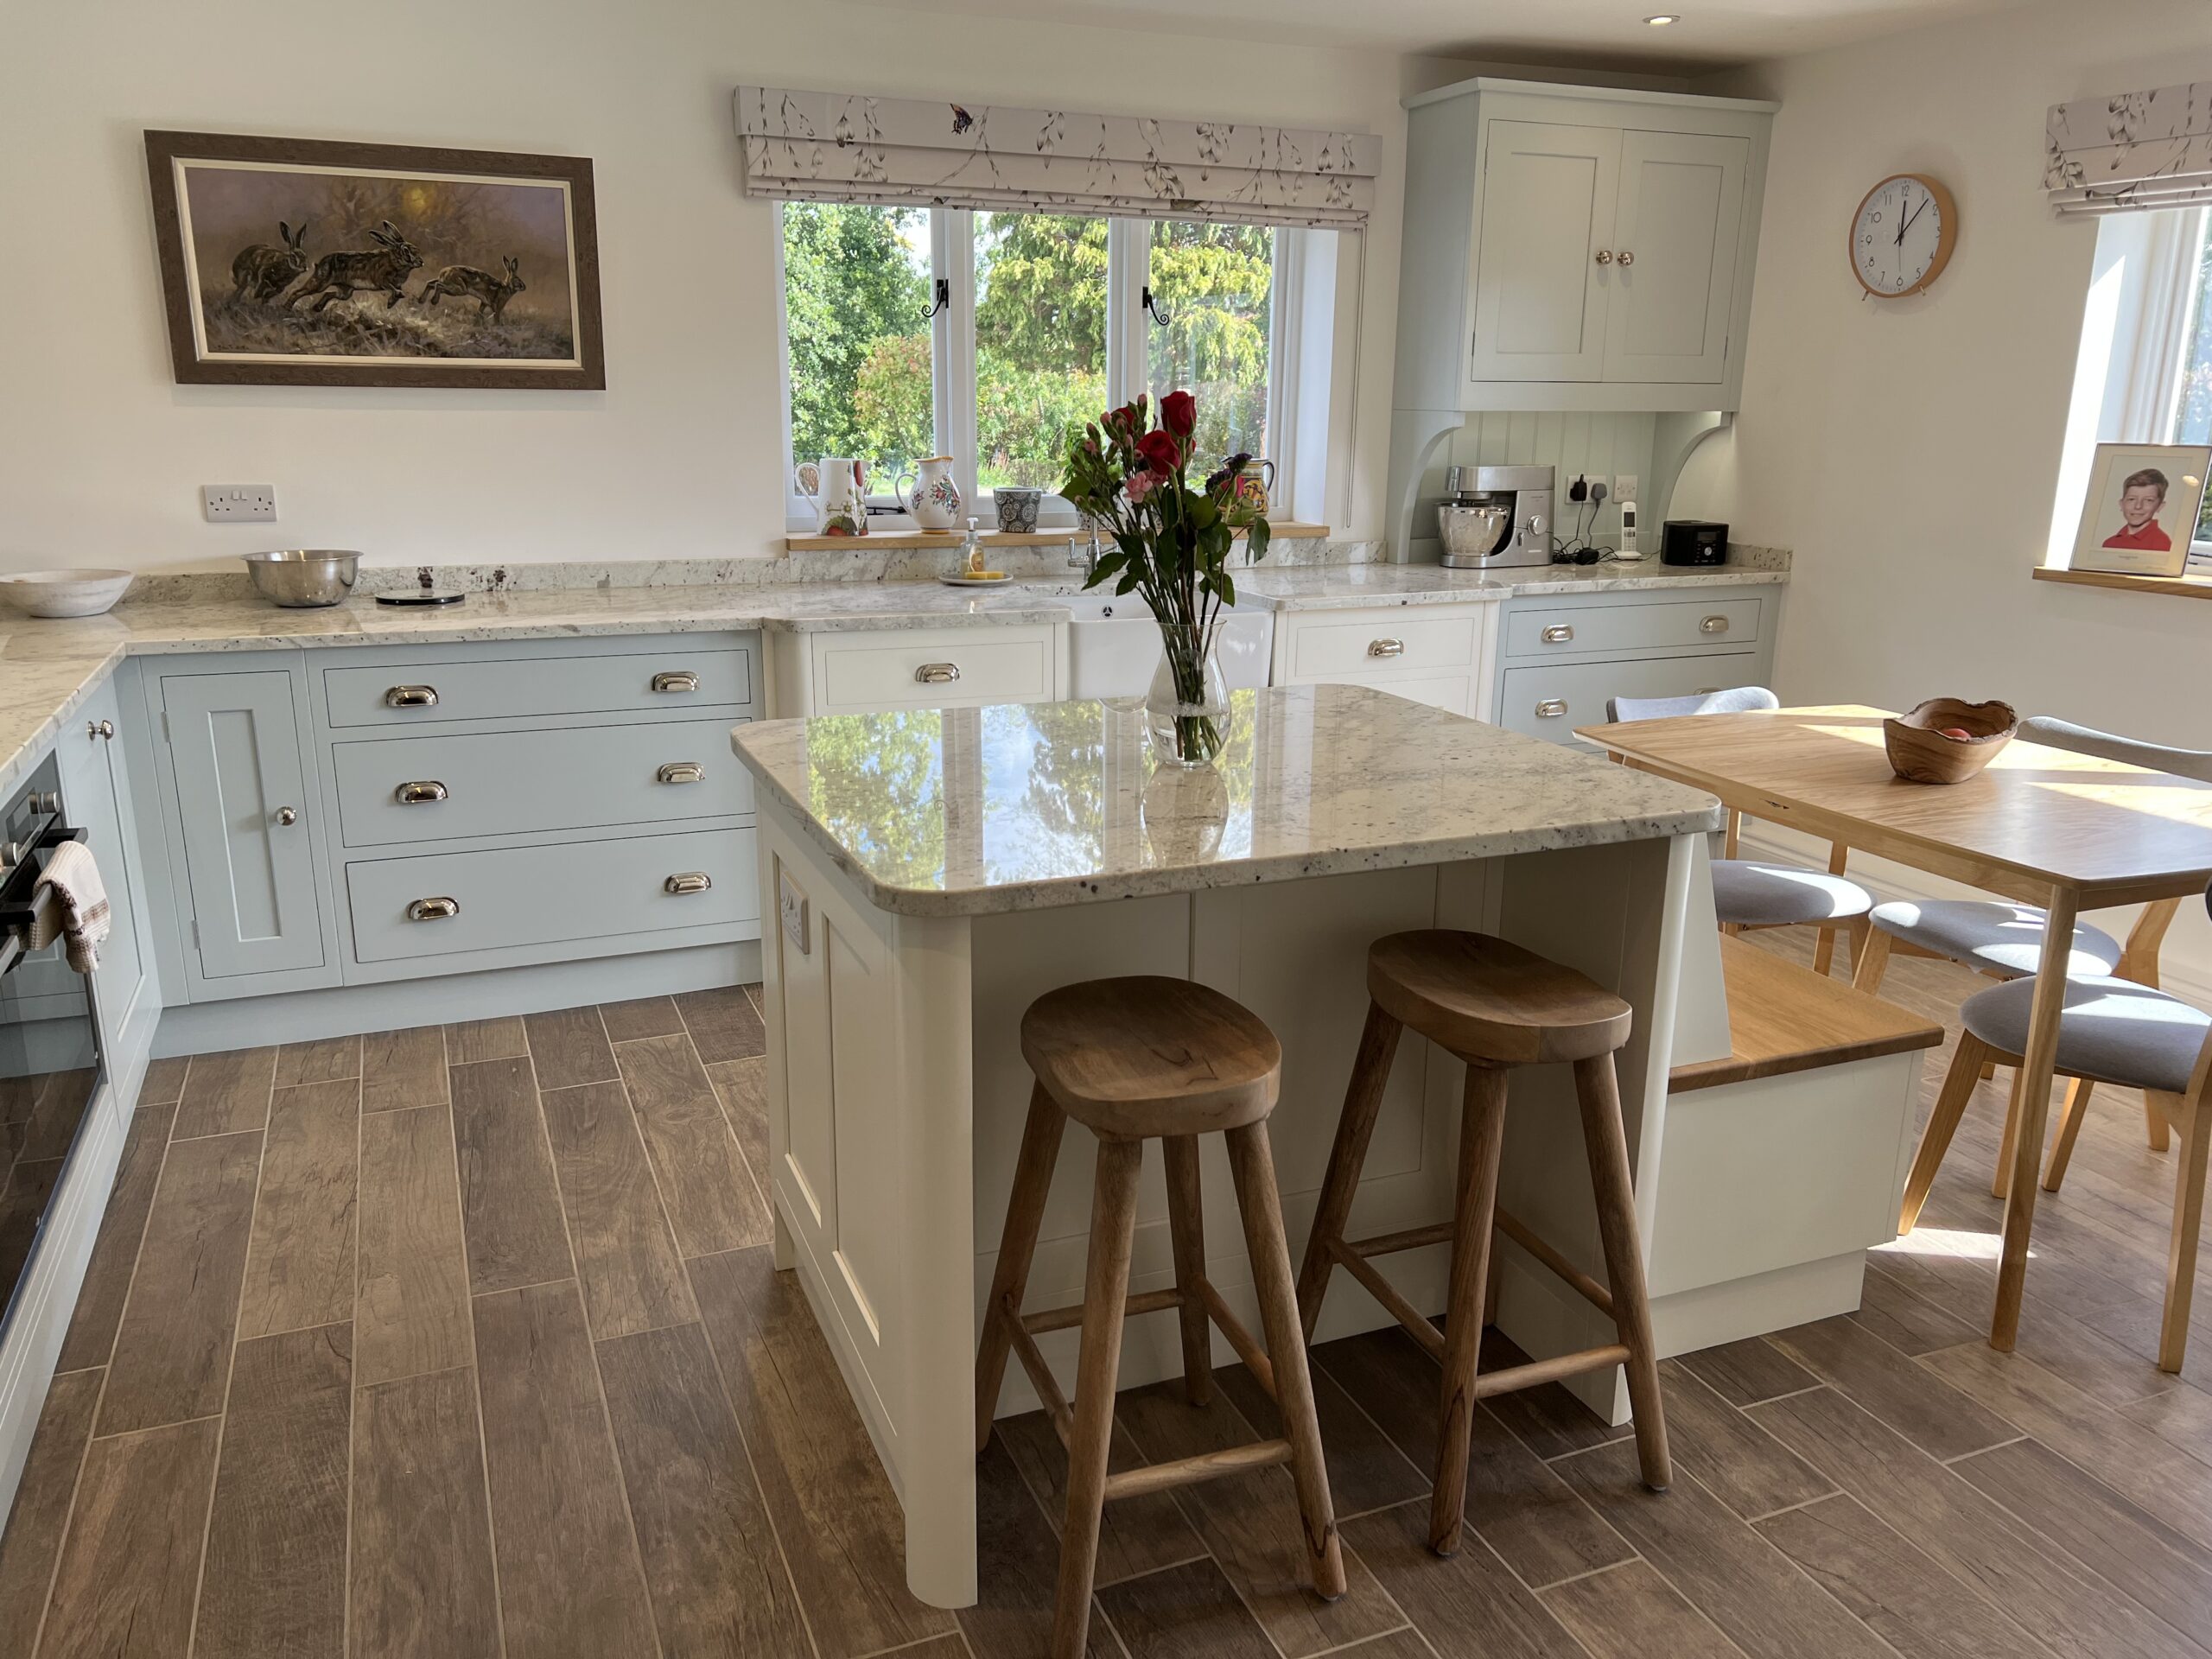 Are you planning your New Kitchen? Give Knights Country Kitchens a call with your ideas. Bespoke Kitchens, Suffolk, Essex, Hertfordshire